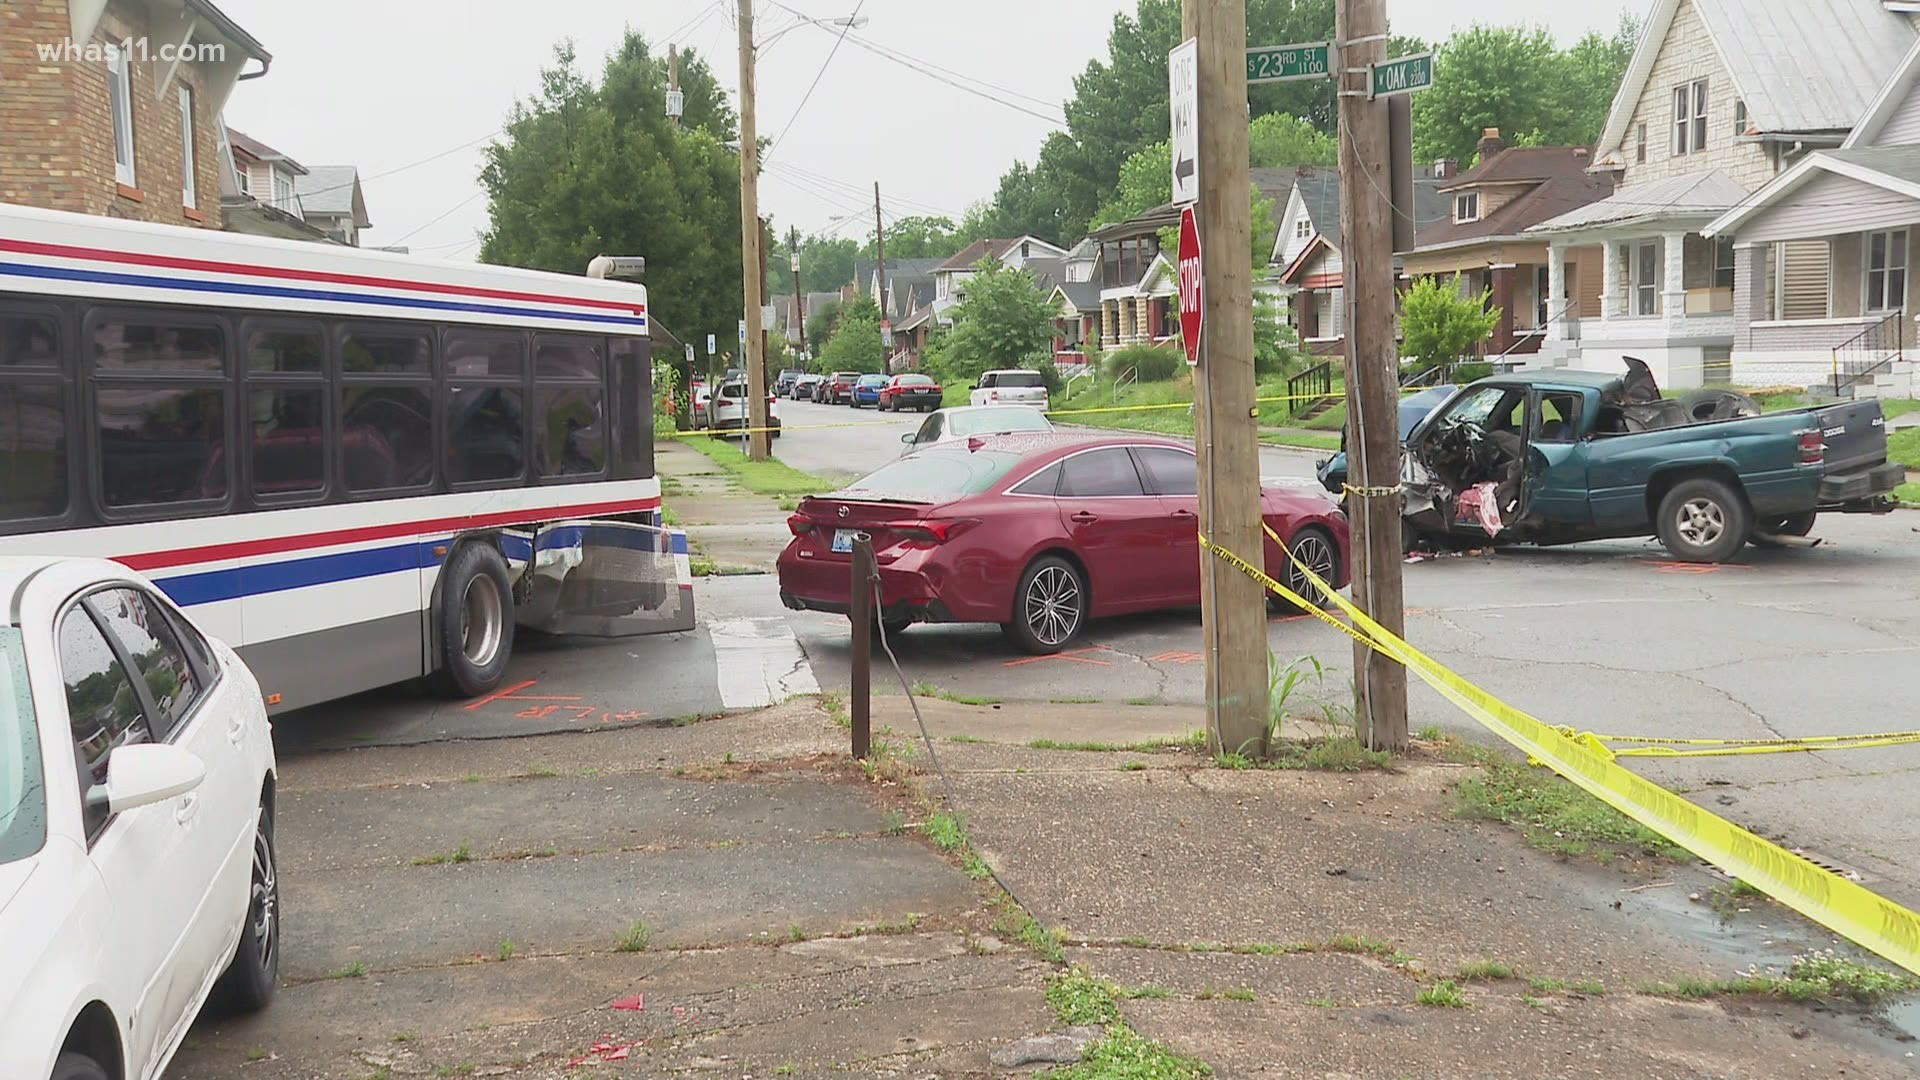 The intersection of South 23rd and West Oak Street, neighbors say, has been dangerous to the community following a fatal crash on June 8.